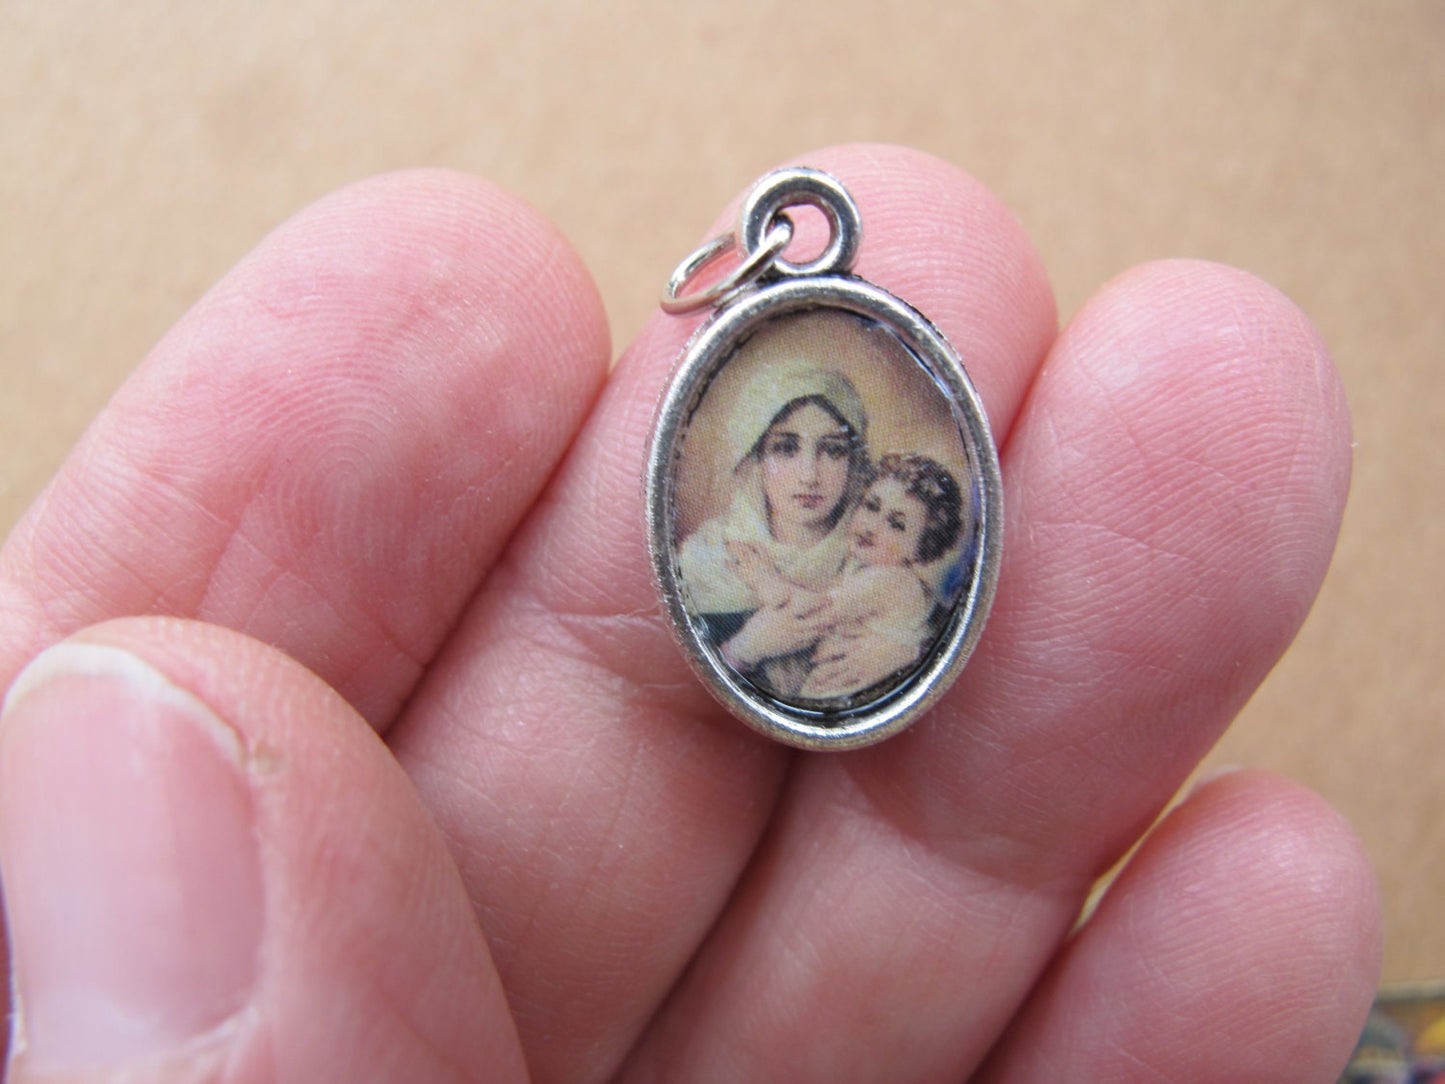 Earrings or Medal - Madonna and Child Medals - Old Masters Jewelry - Catholic Gifts - Confirmation Gifts - Hand Made